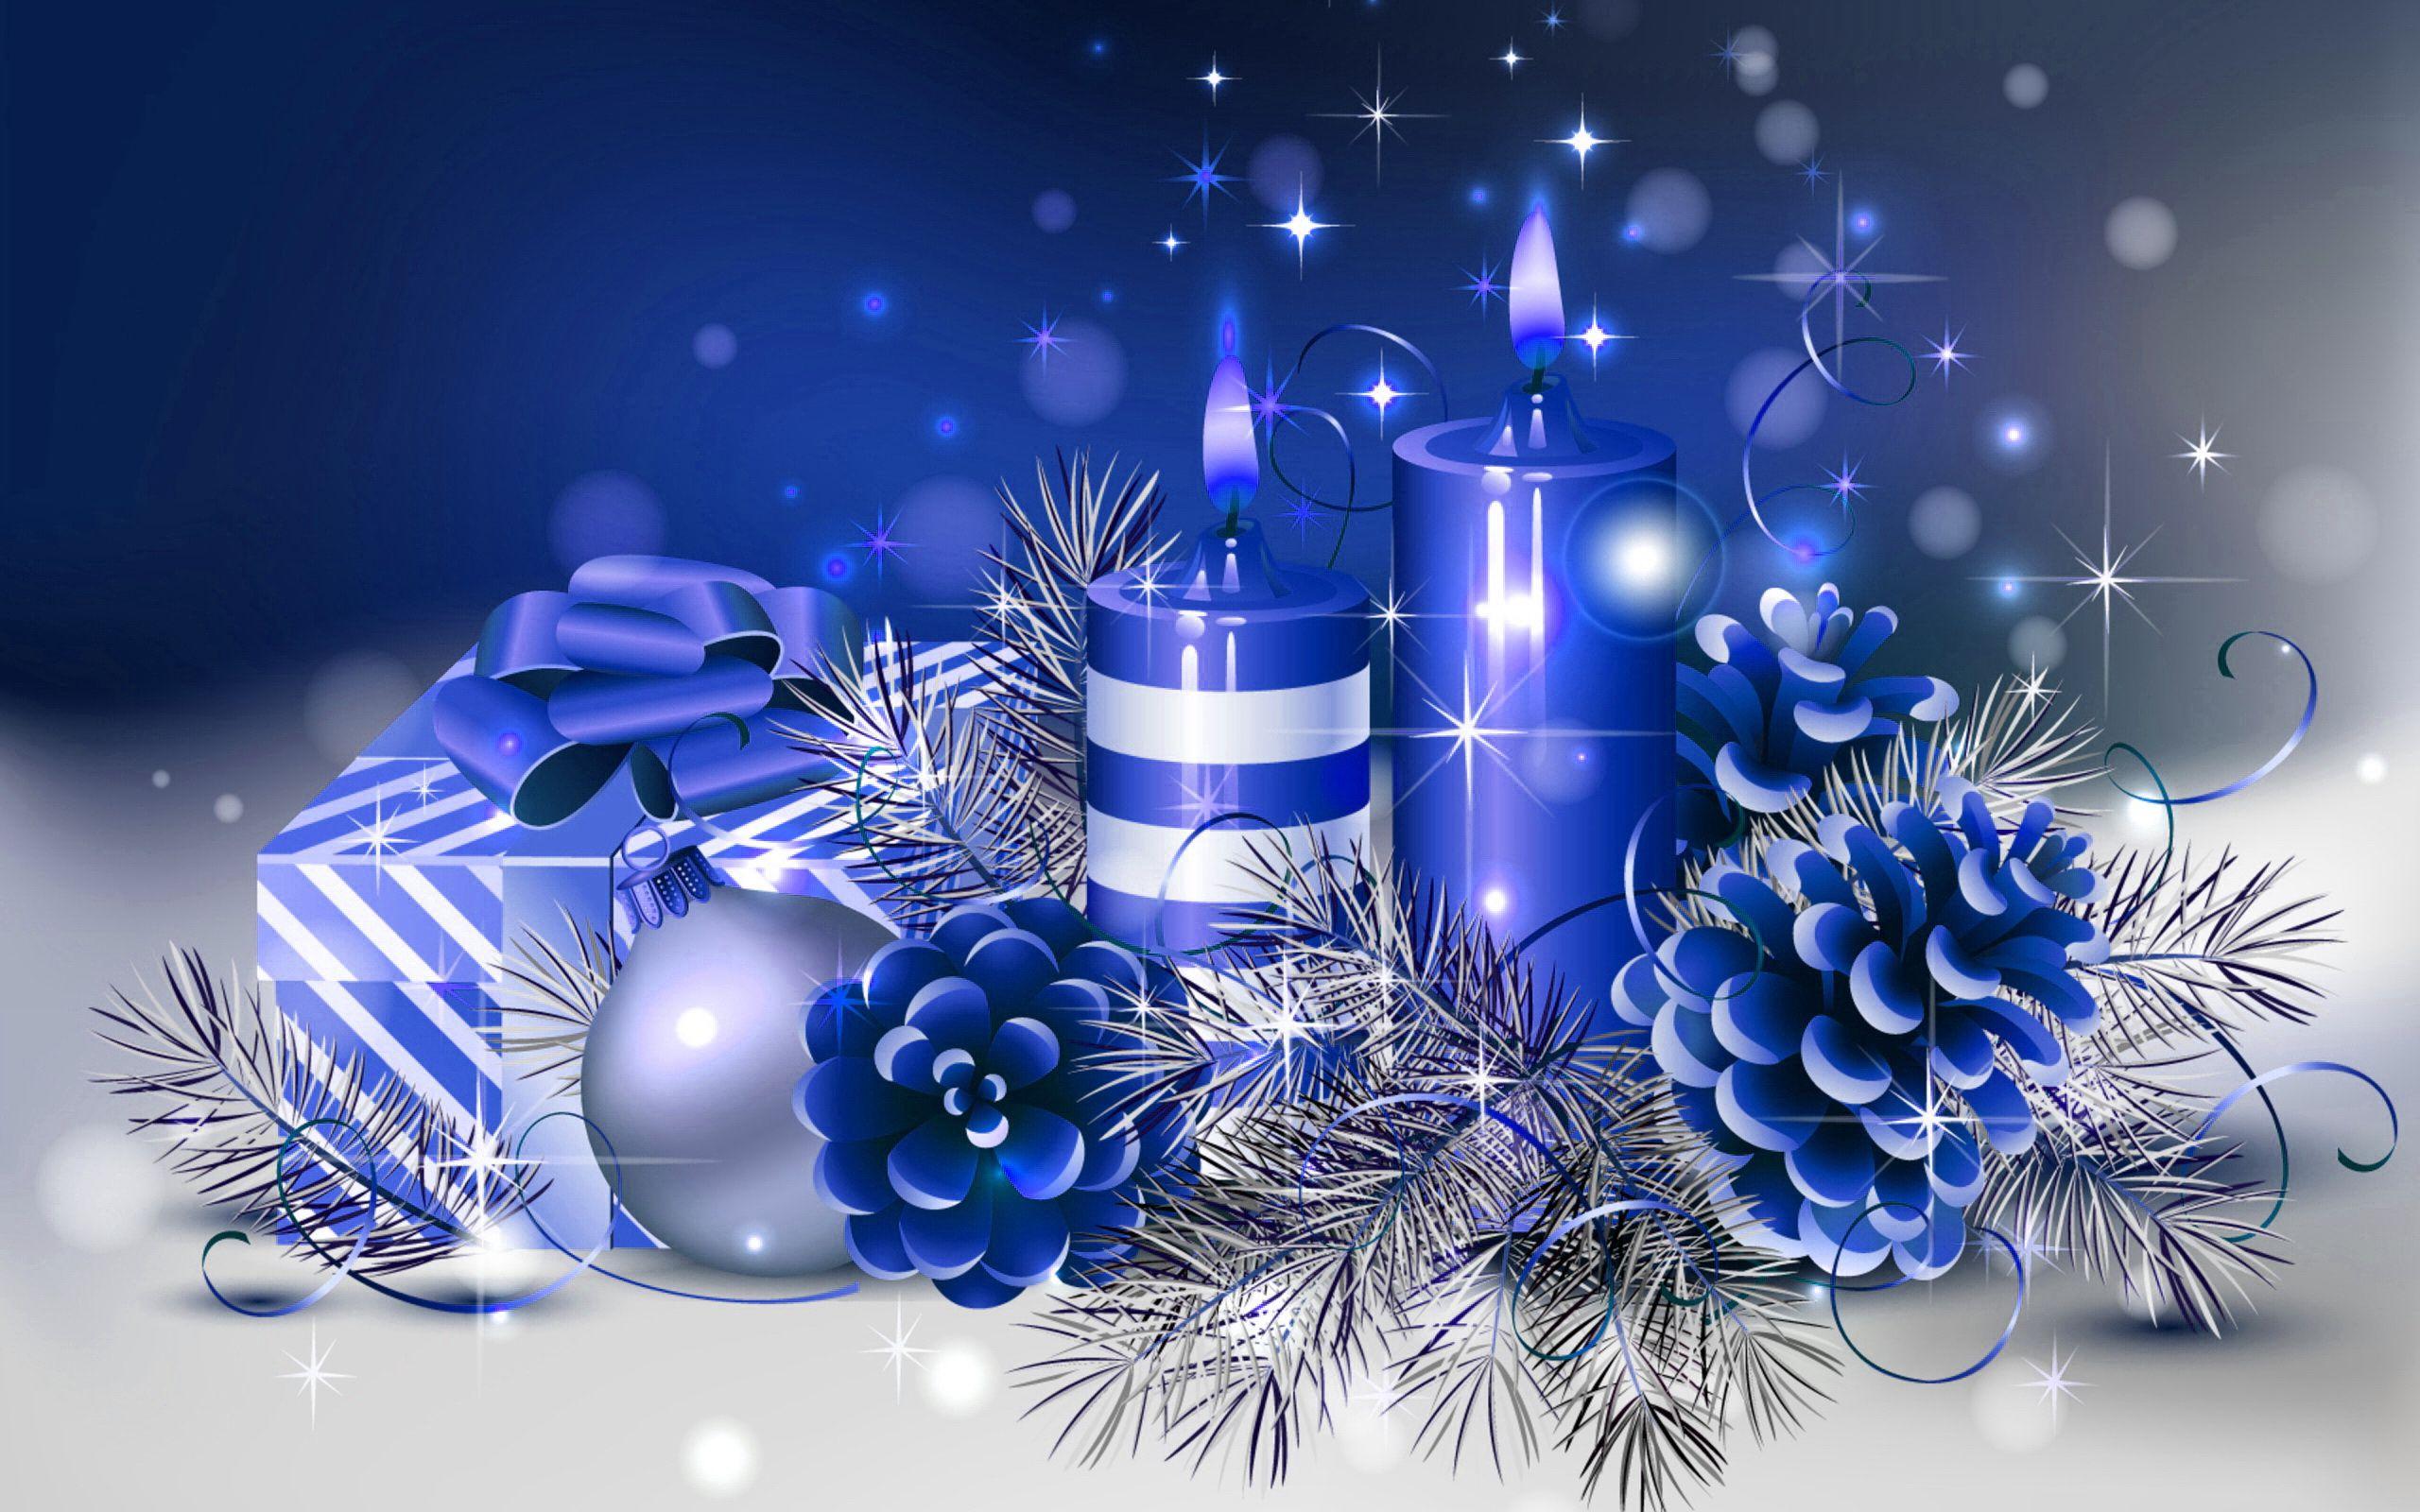 3D Christmas Wallpaper, 3D Christmas Background for PC